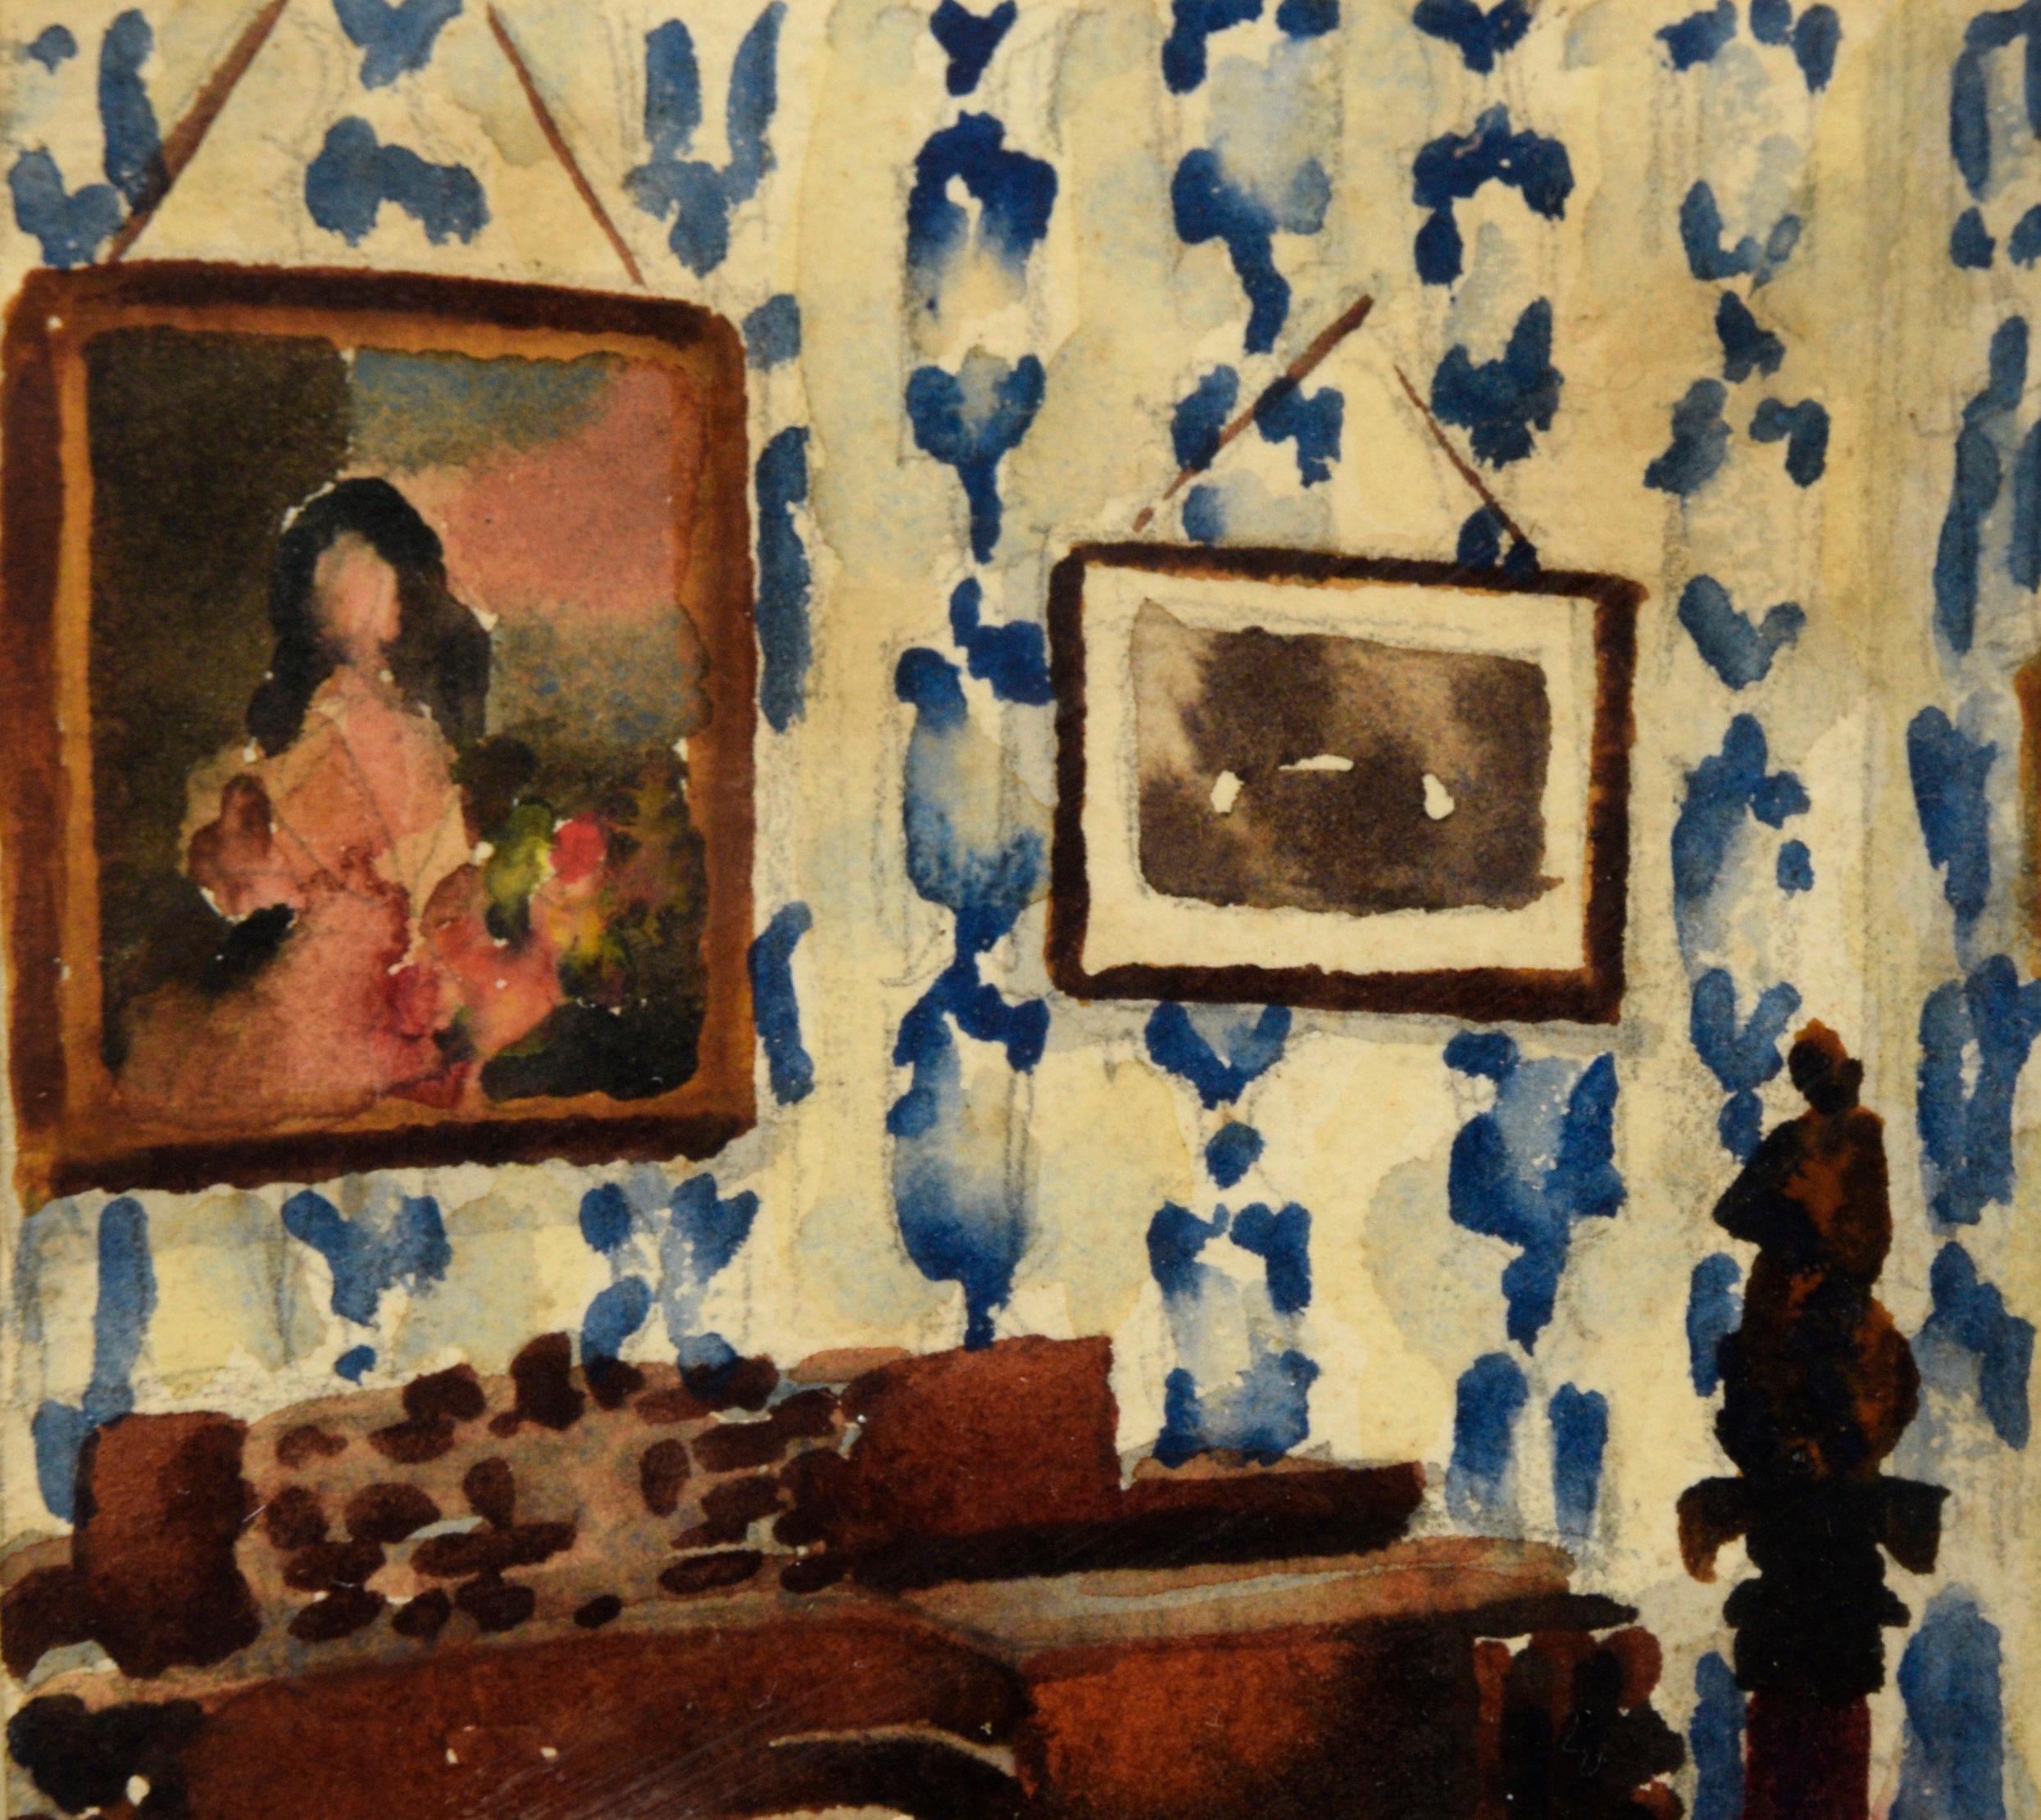 Pair of Interior Scenes of a Victorian Home - Watercolor on Heavy Paper - American Impressionist Art by David Mode Payne